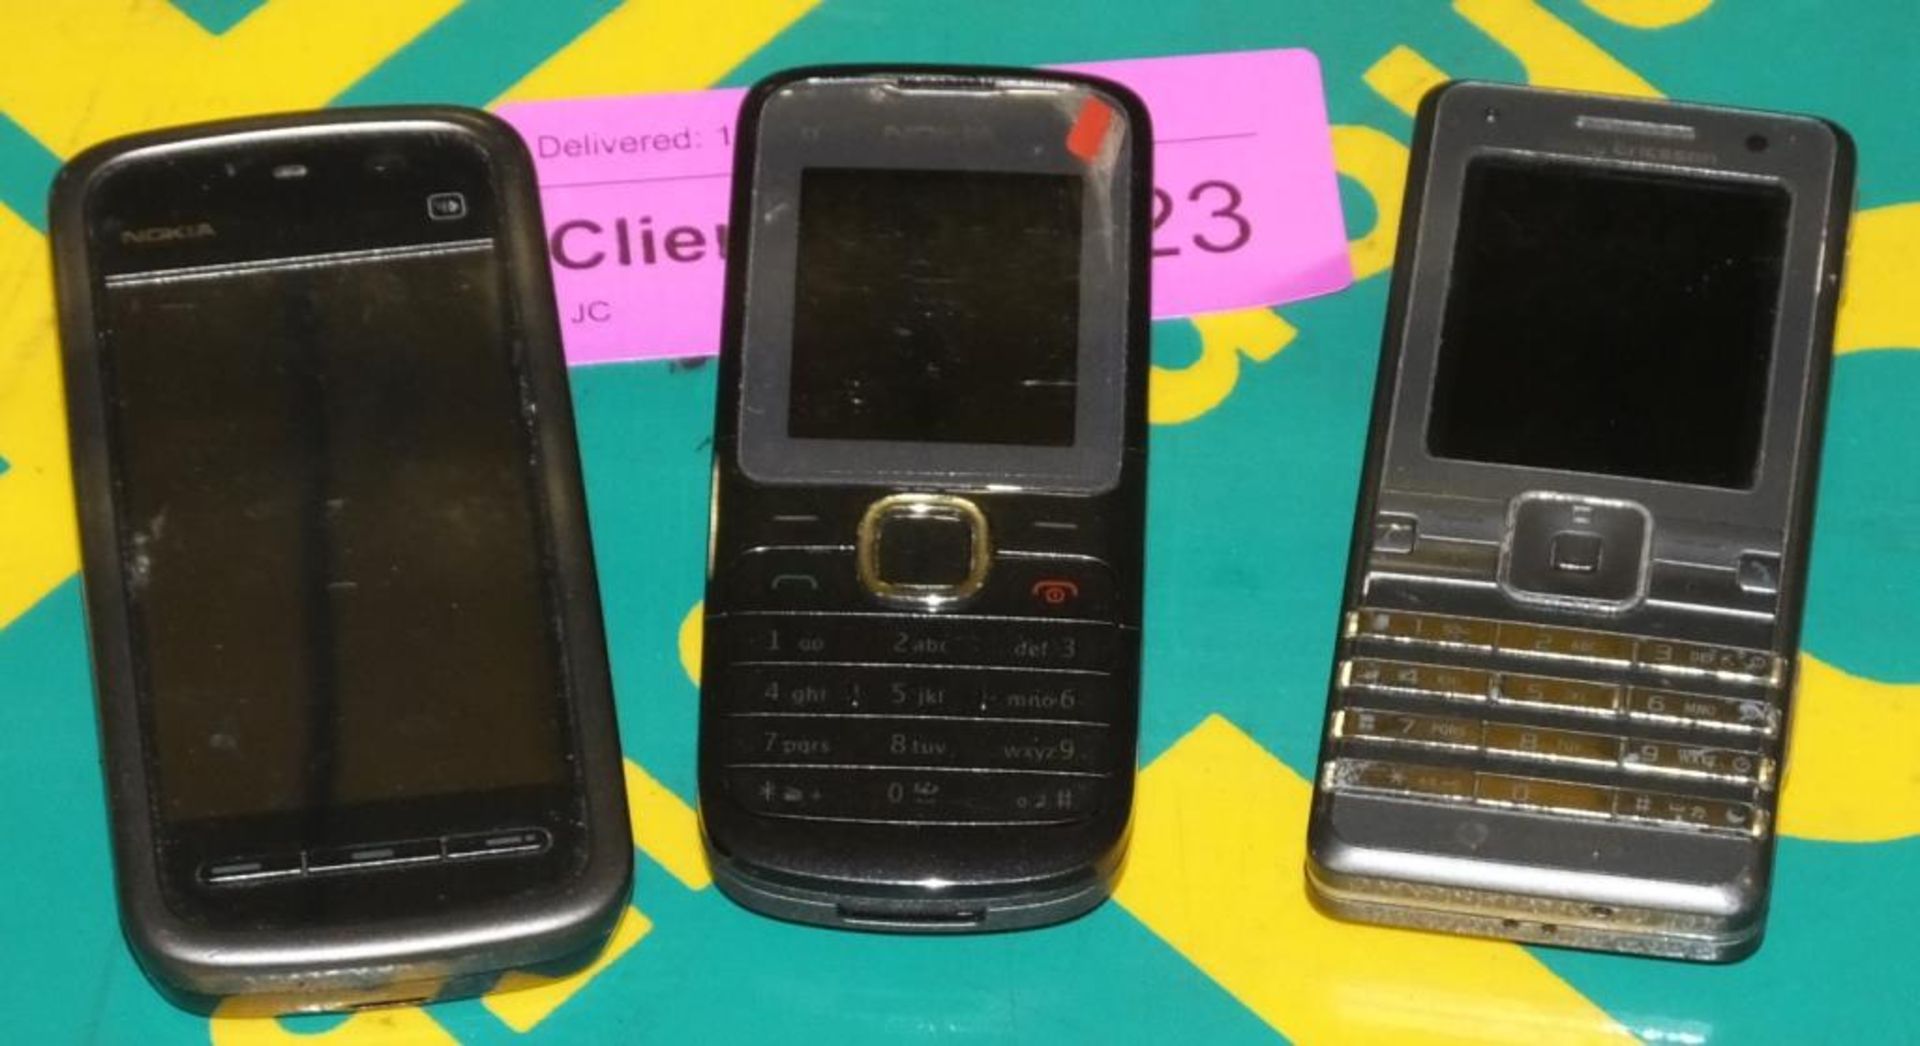 3x Mobile phone handsets - no chargers or cables